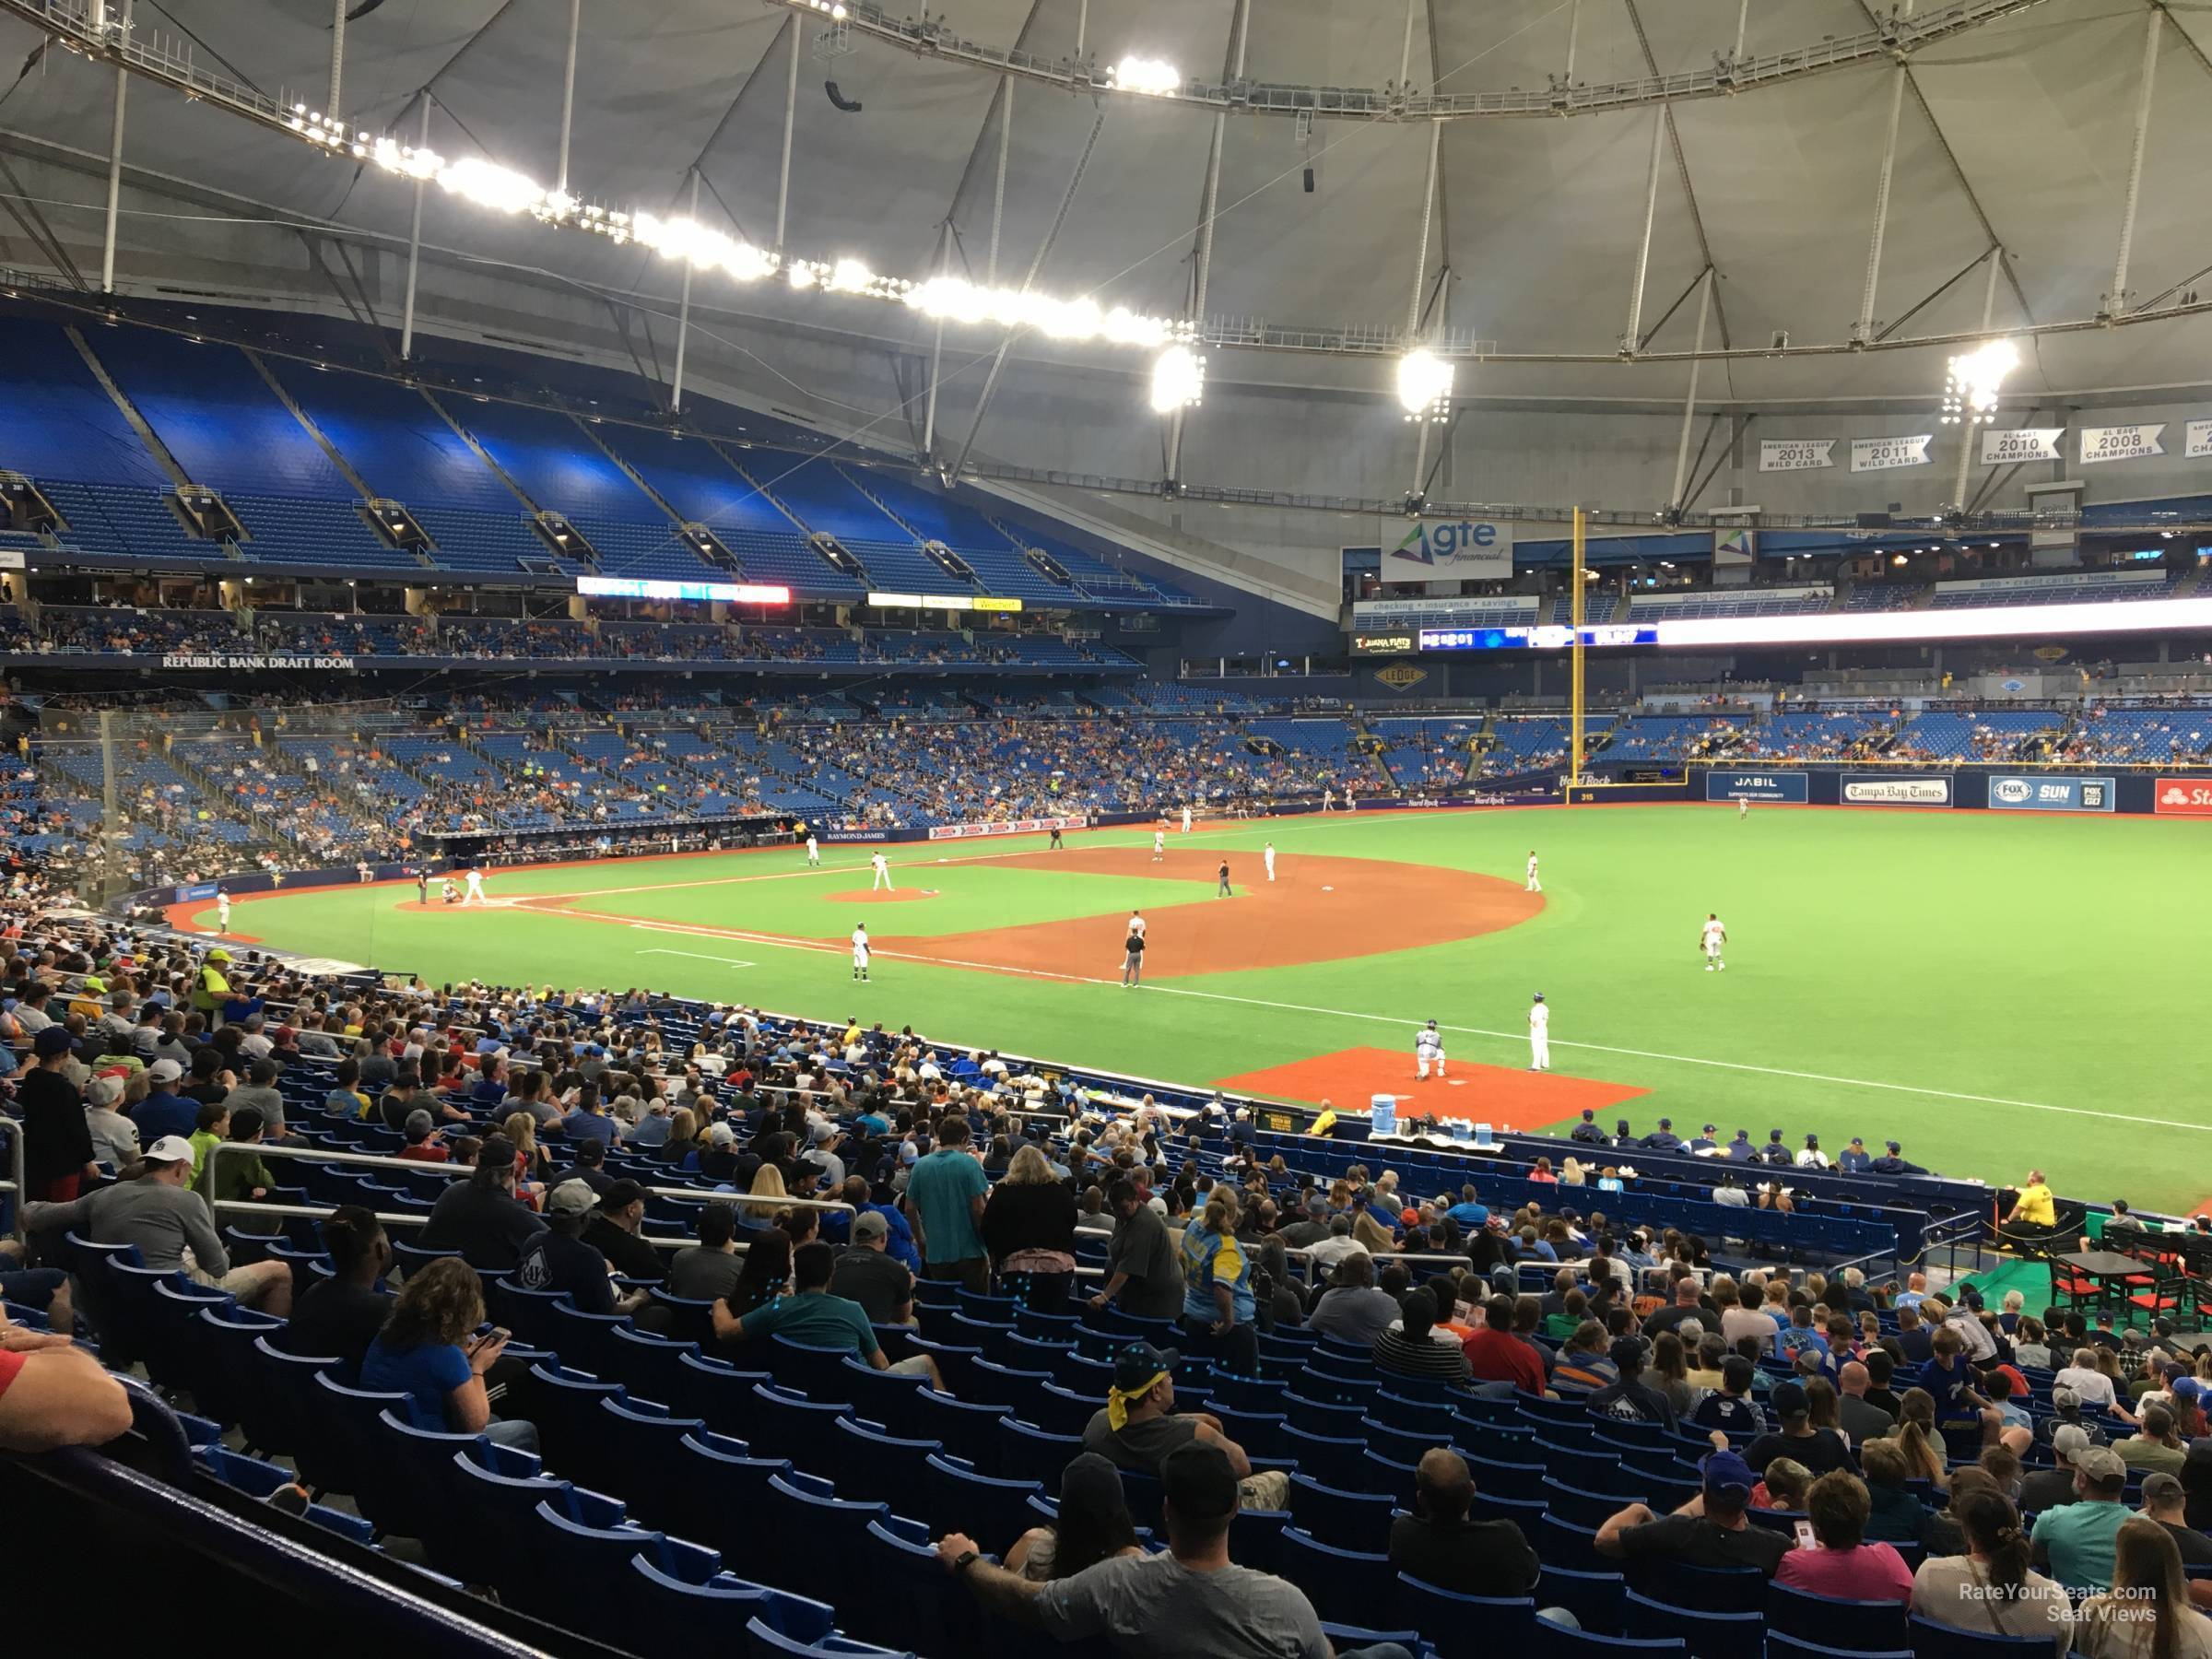 Tropicana Field Seating Chart With Row Numbers Two Birds Home